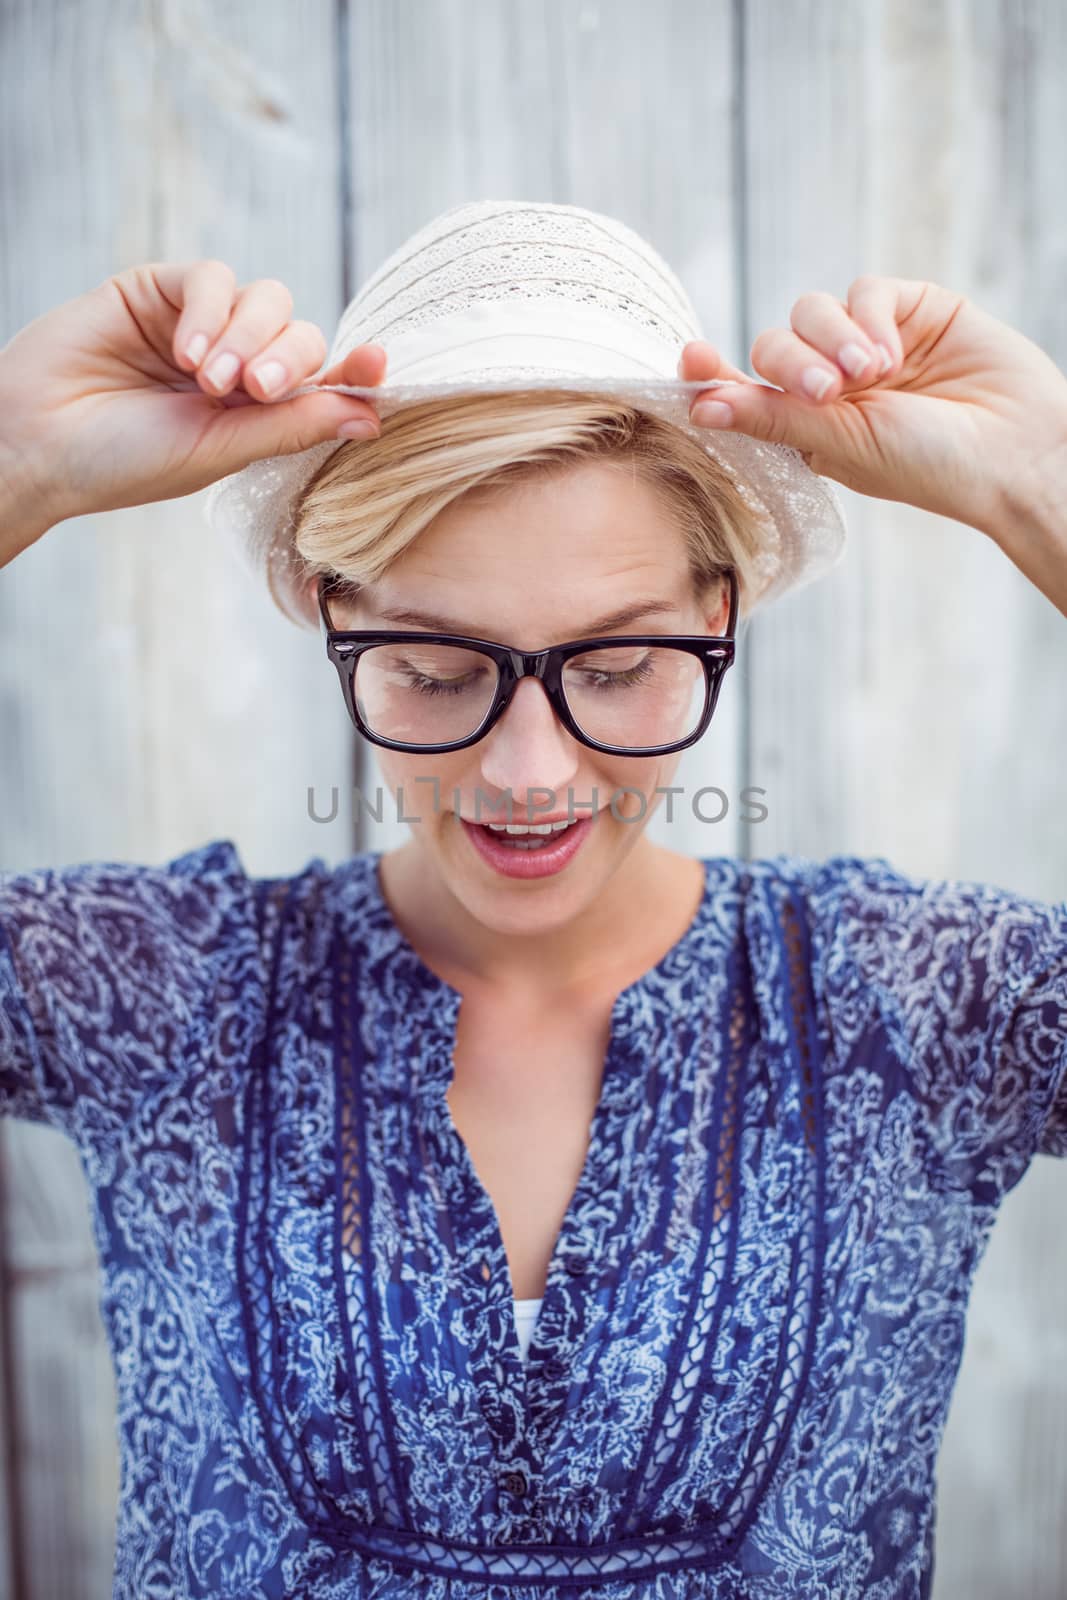 Pretty blonde woman wearing hipster glasses on wooden background